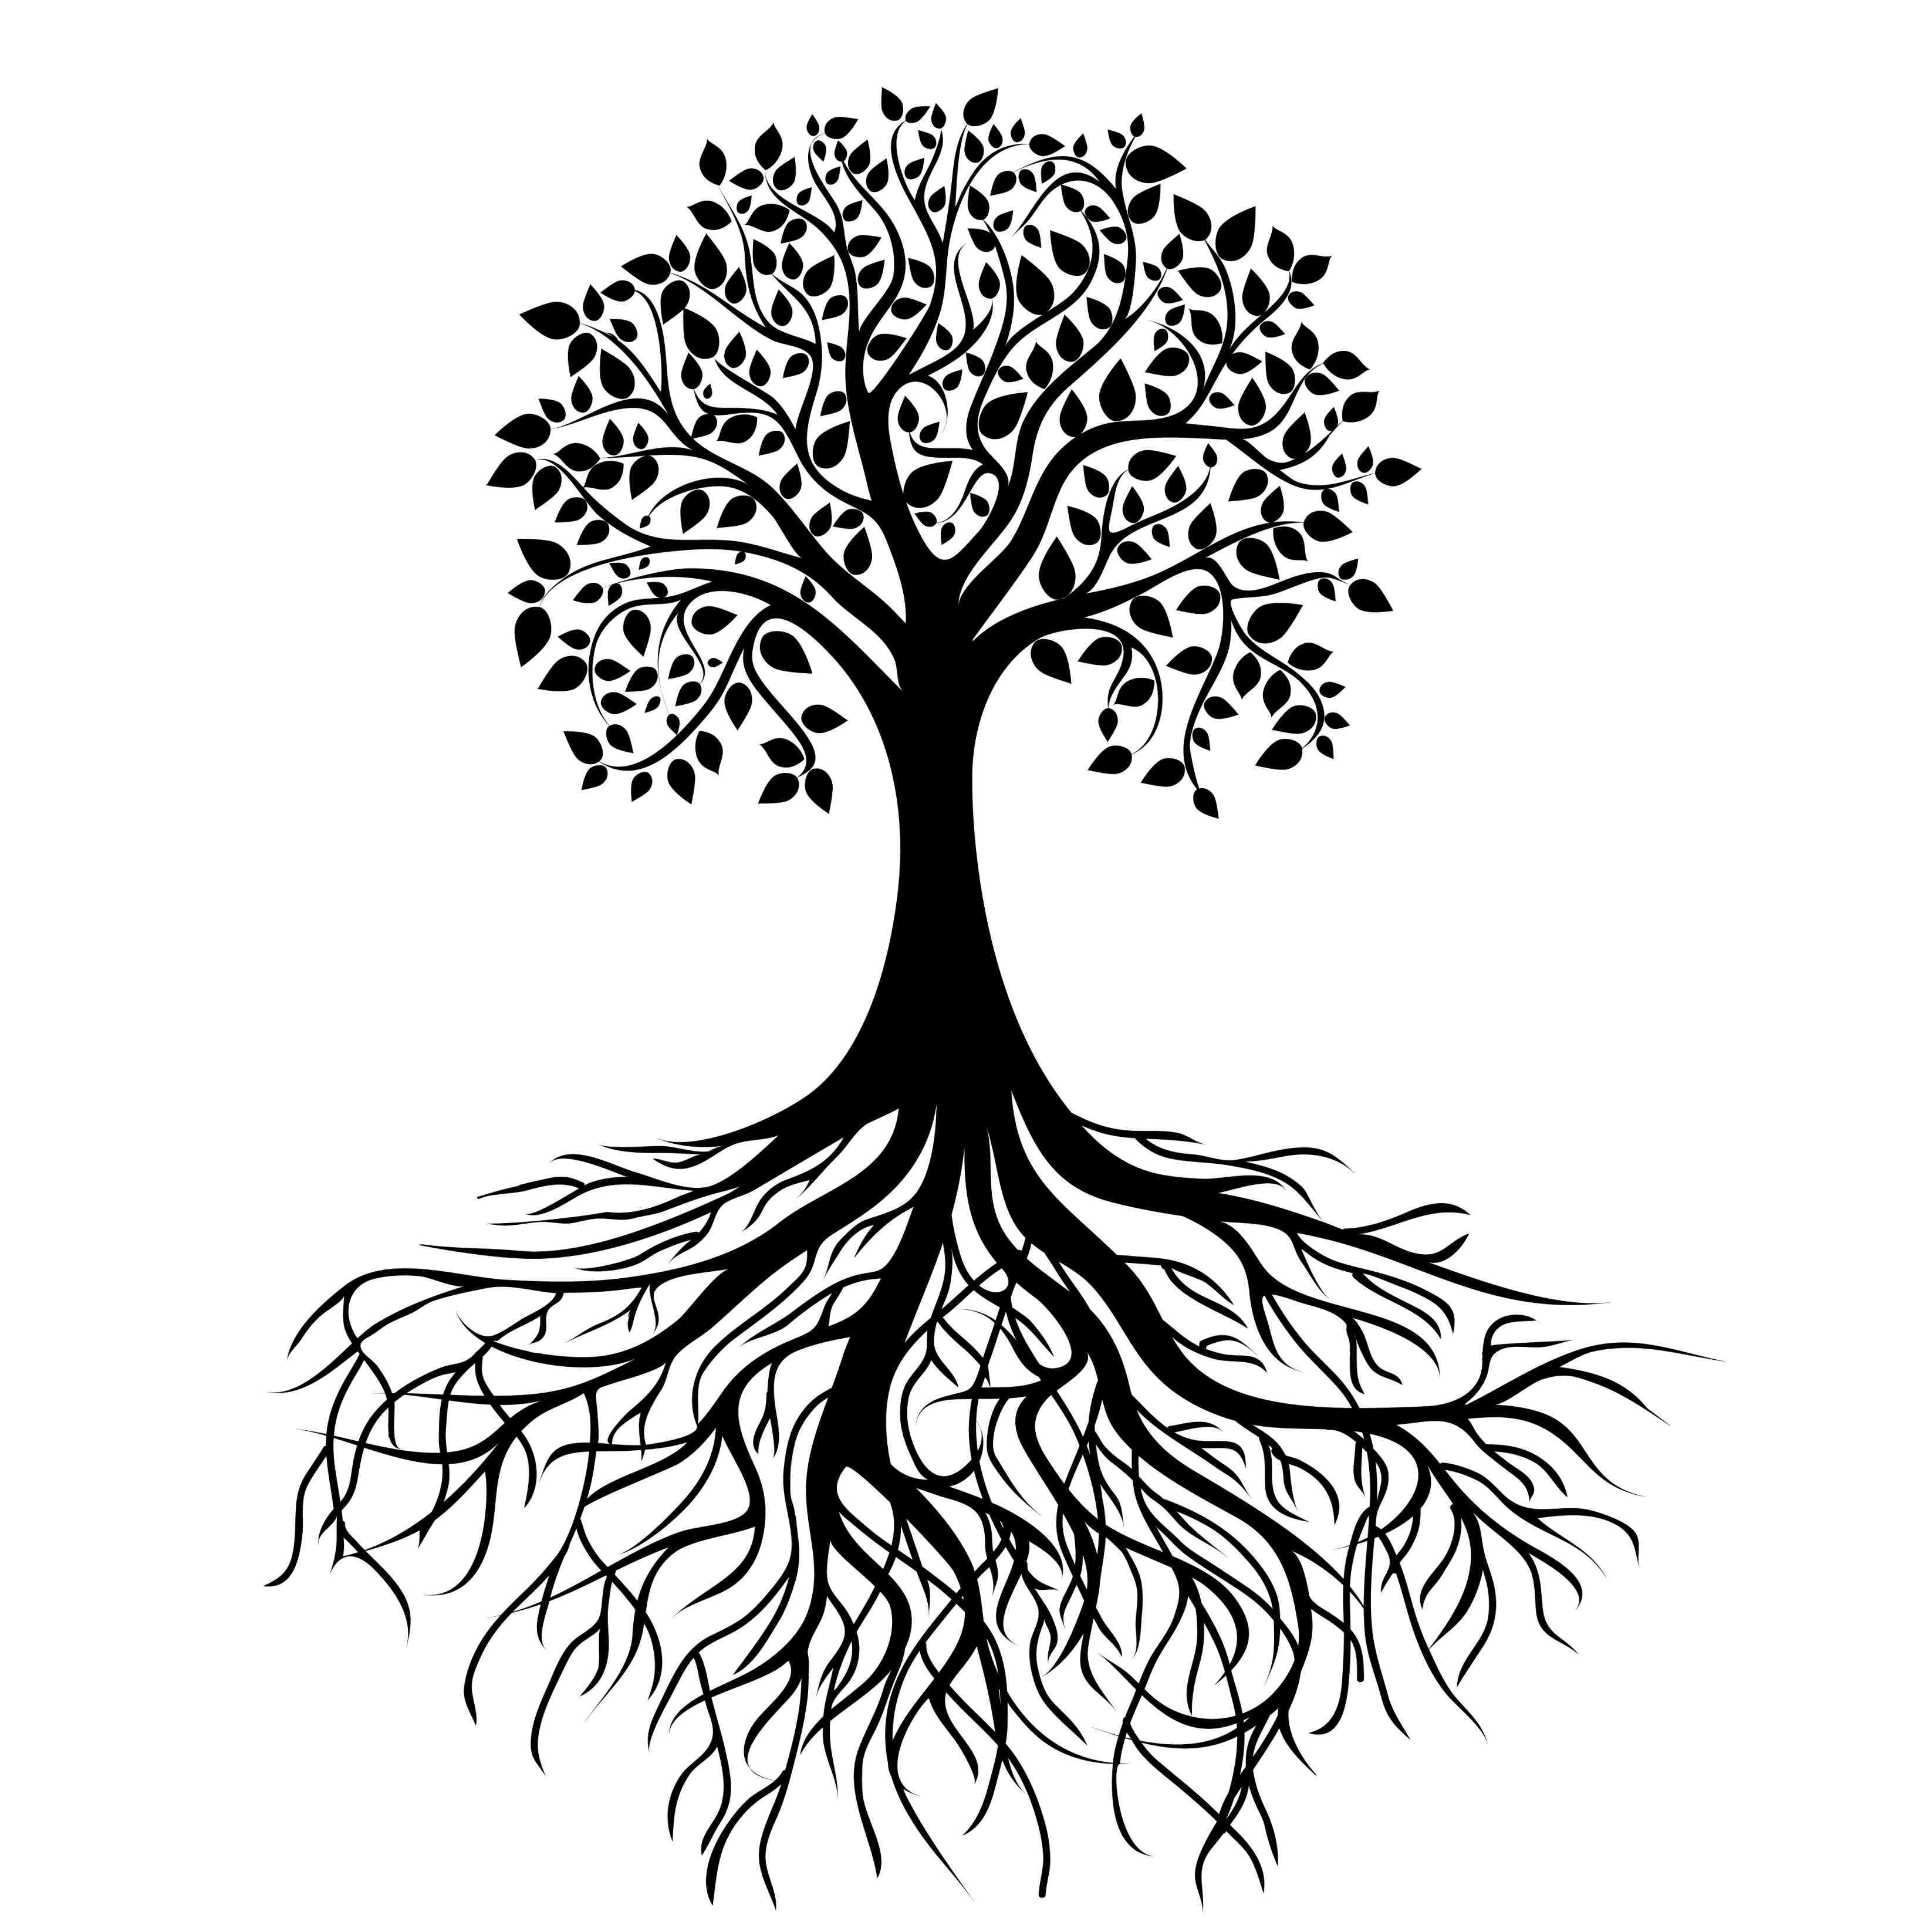 Images Of Trees And Roots - ClipArt Best